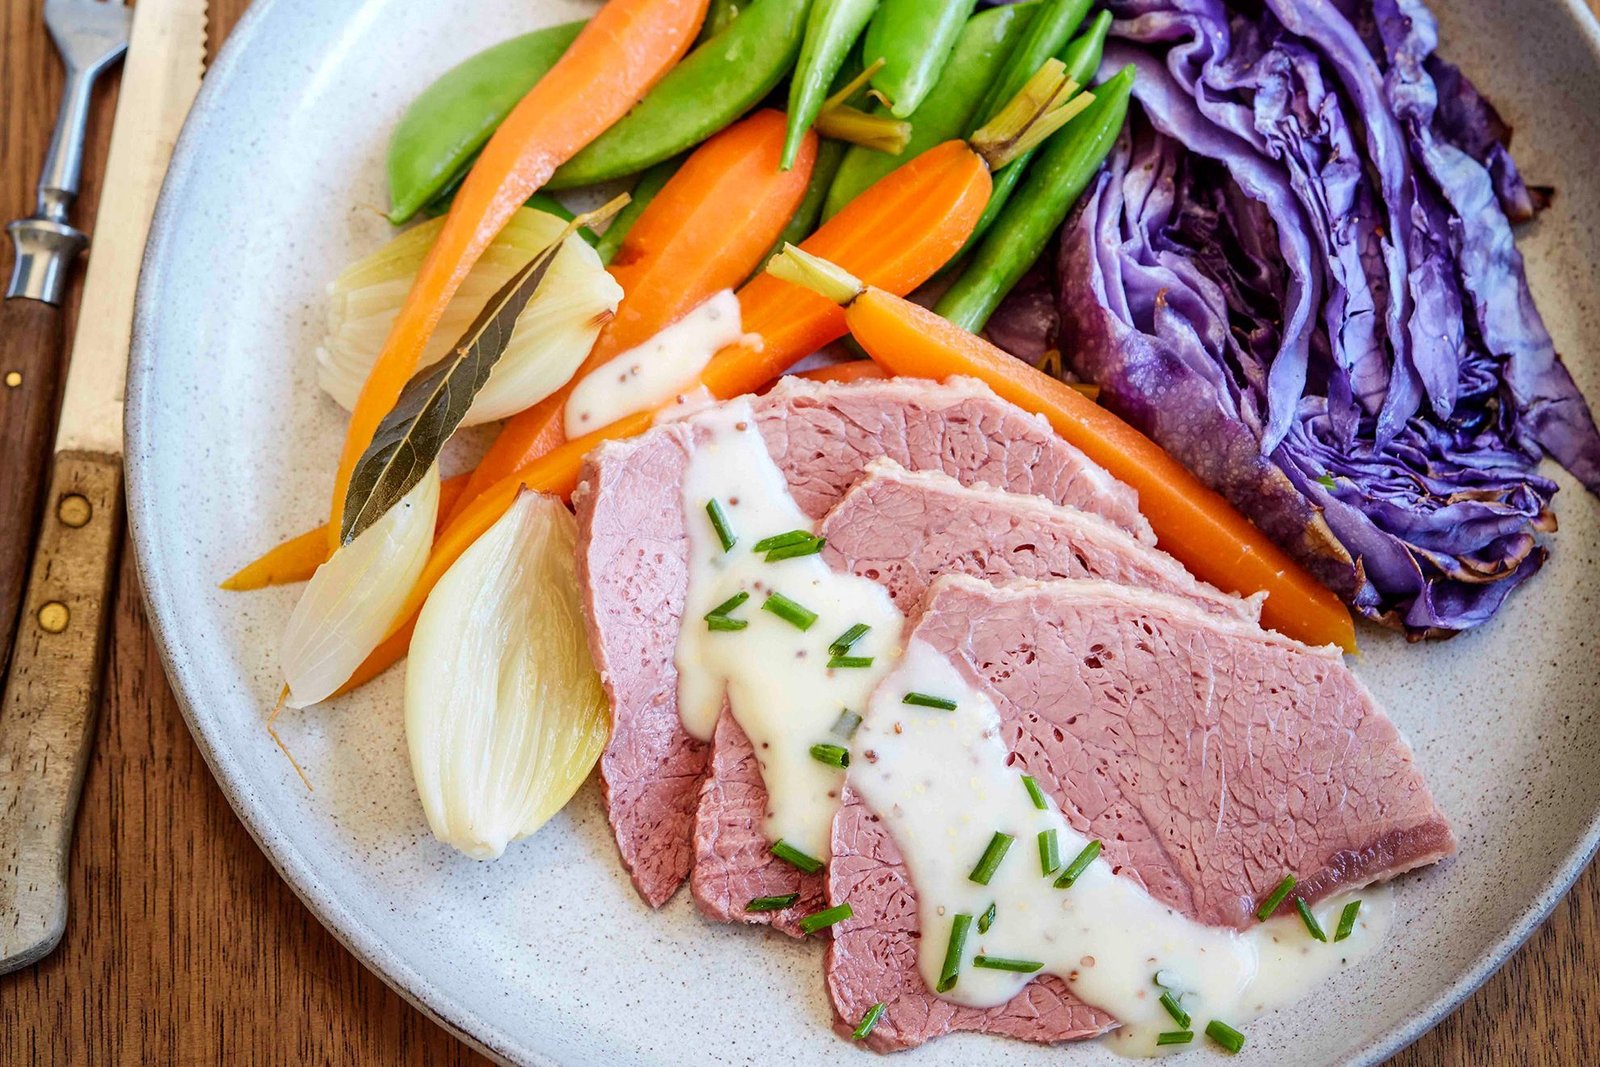 Corned beef and vegetables